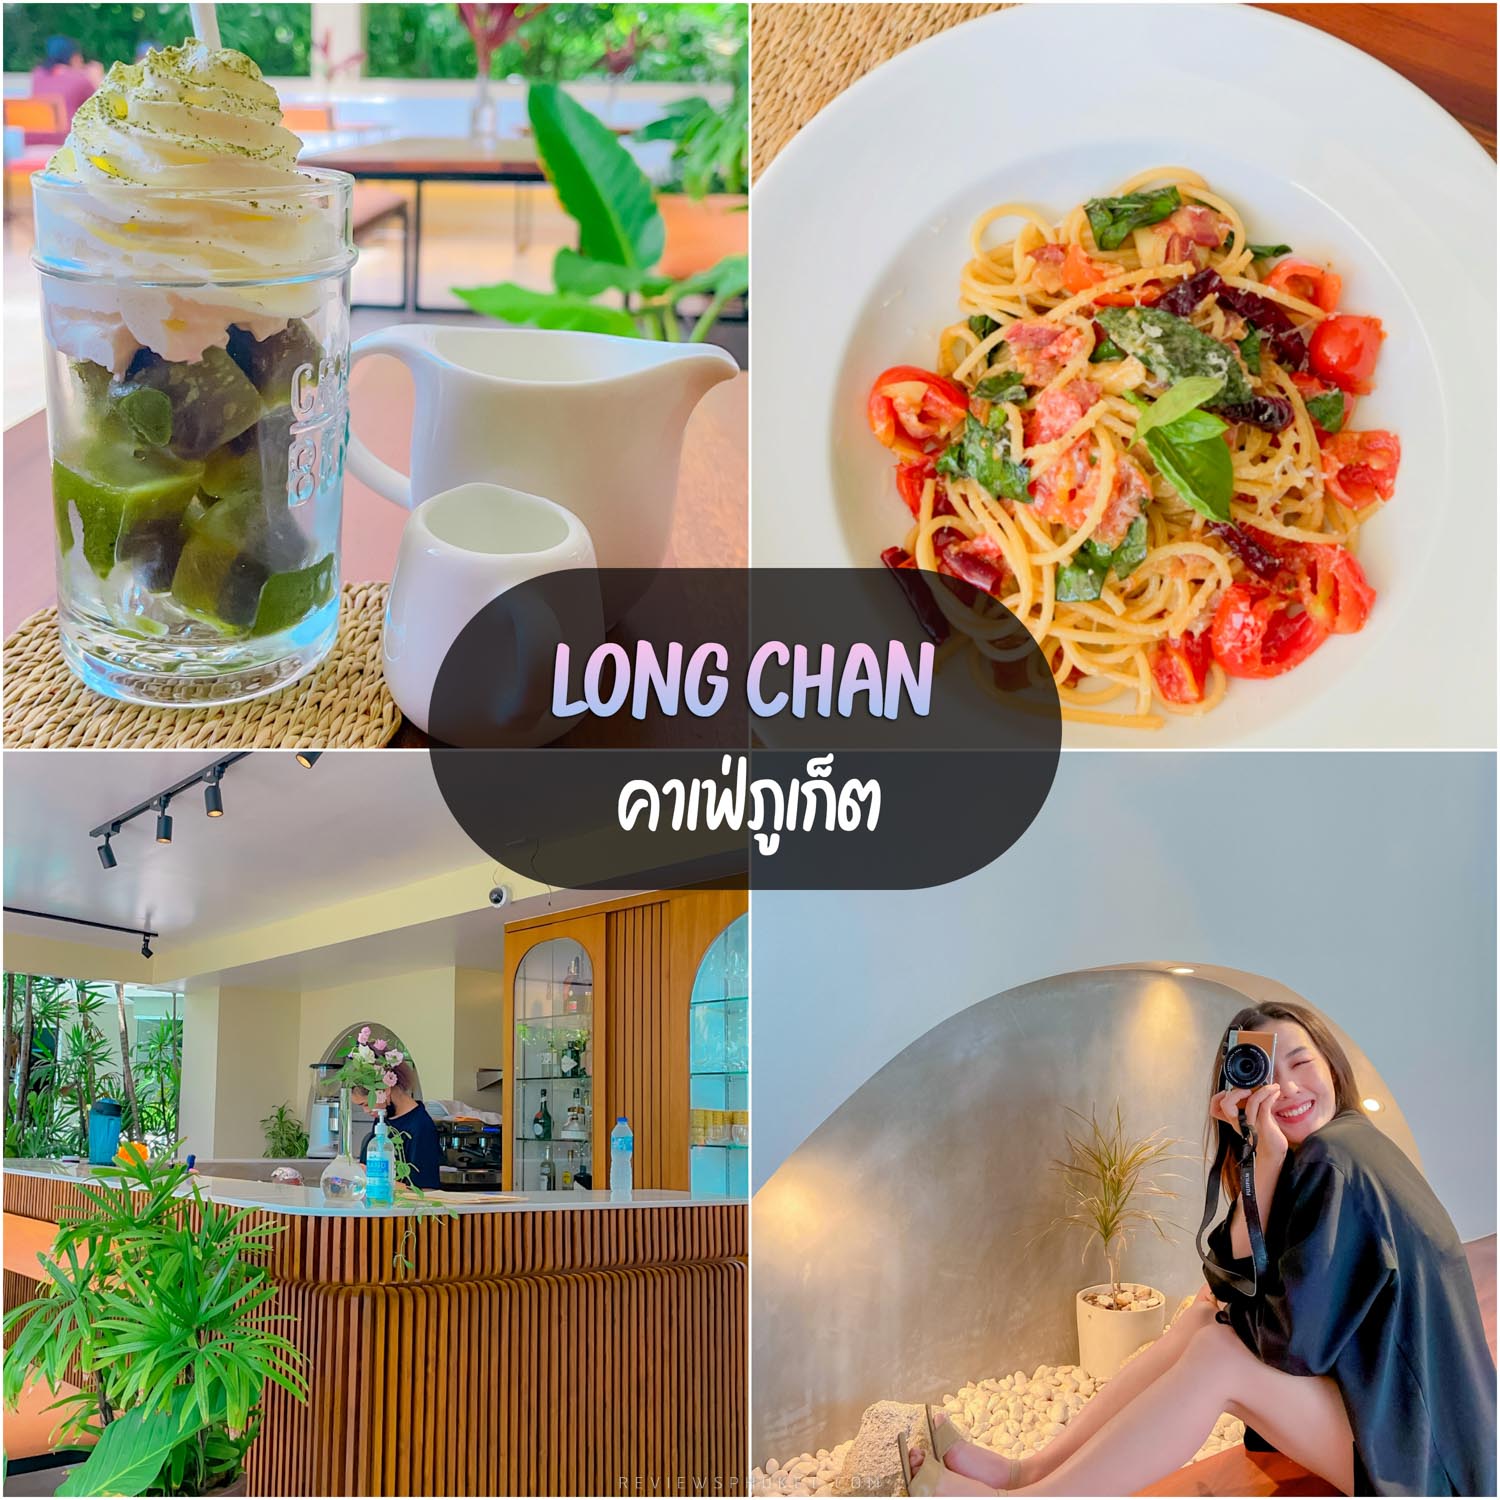 Long chan Phuket cafe, comfortable shop, good atmosphere, delicious spaghetti. You have to come check in.